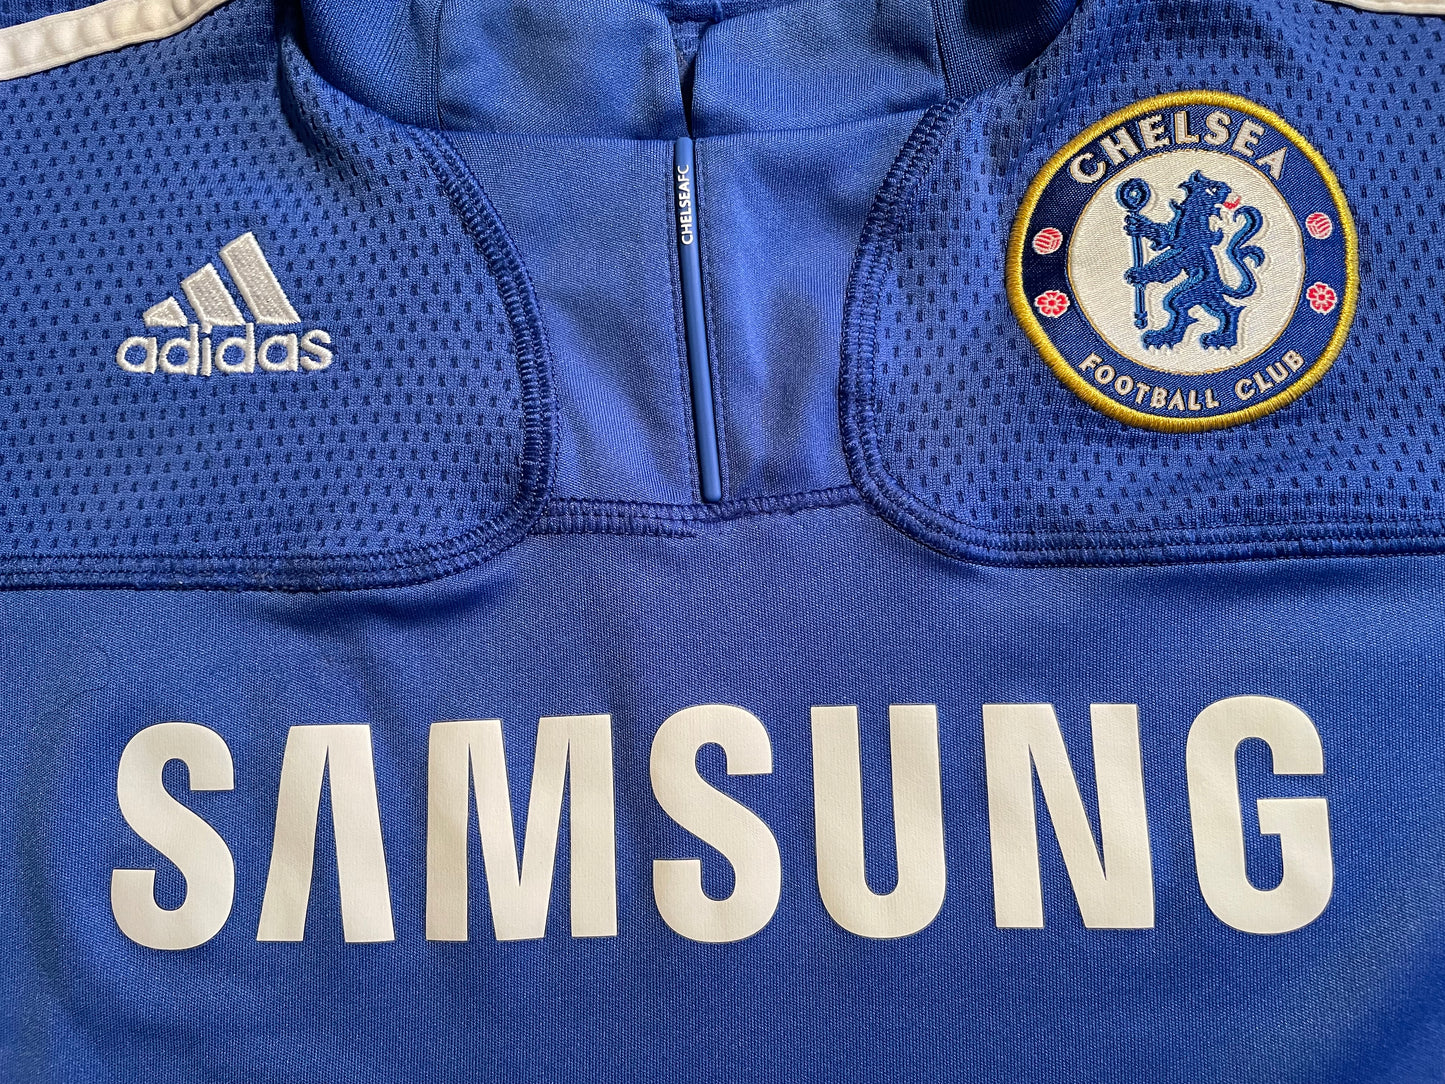 Chelsea Home Shirt 2009 (very good) Childs 7-8. Height 14 inches